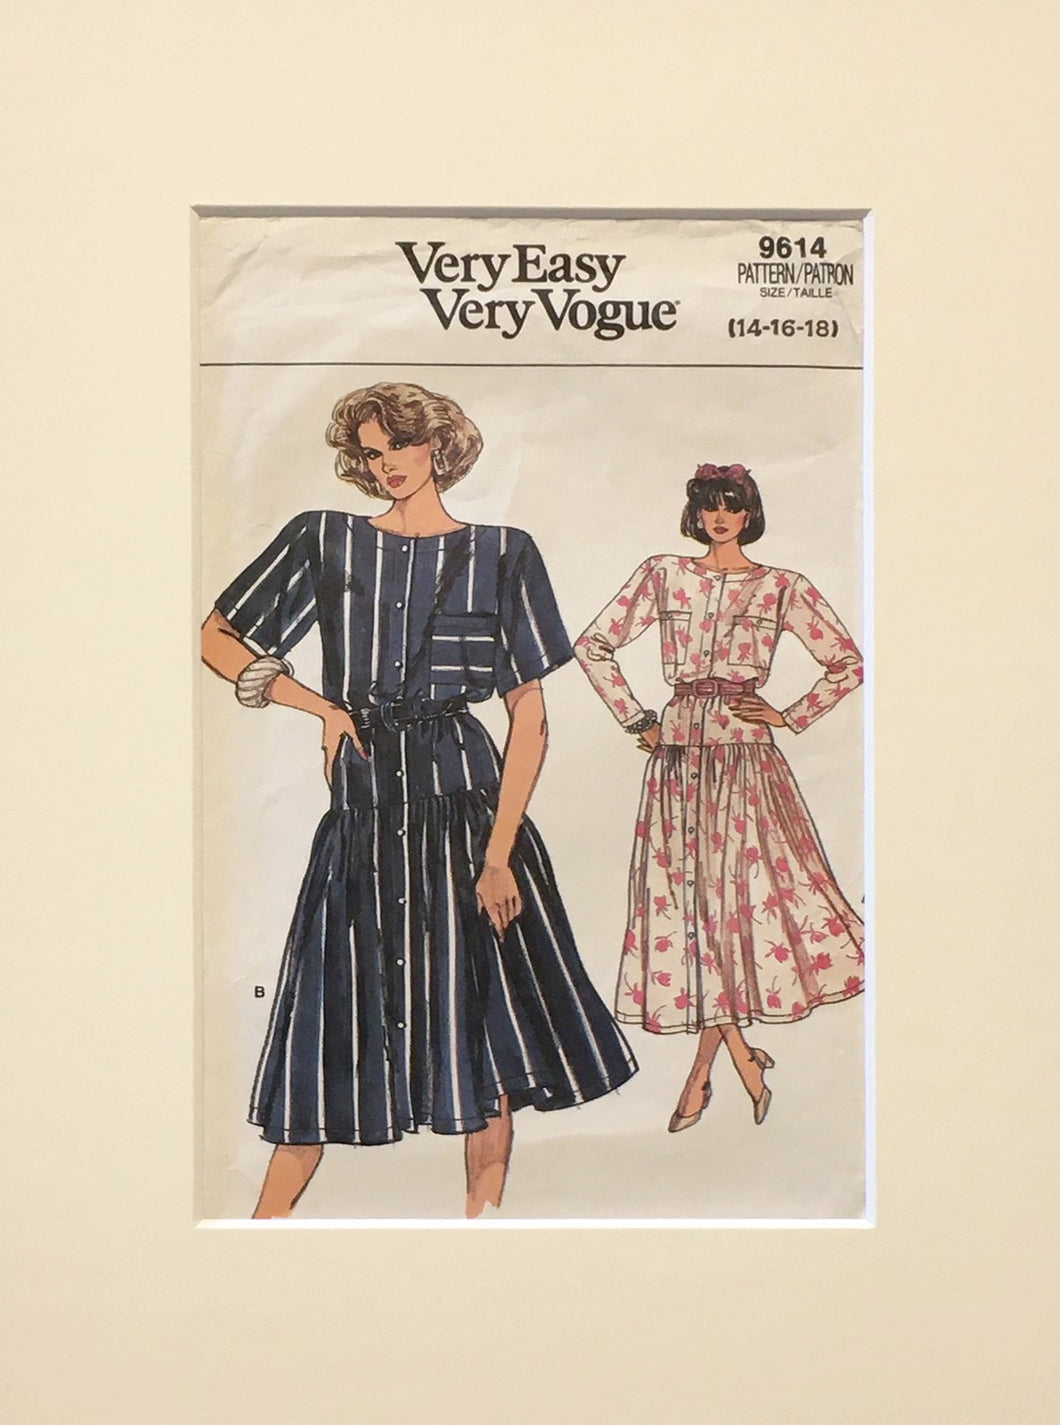 Original, Mounted, Vogue Sewing Pattern Covers 1950's~80s